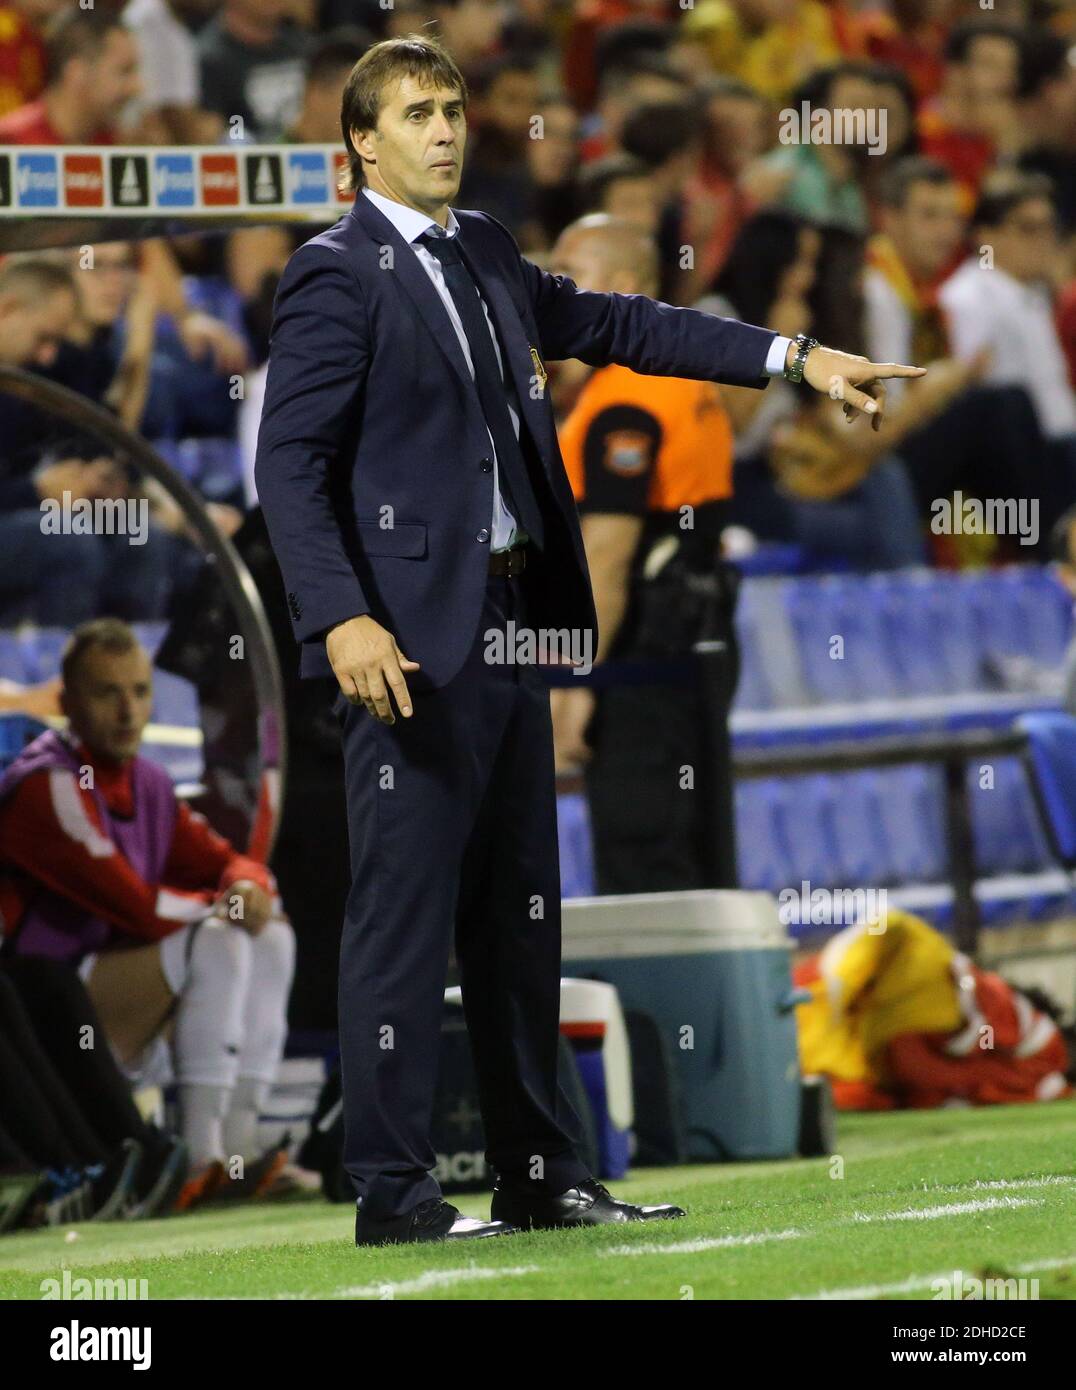 Julen Lopetegui, the coach of Spain in action during the World Cup qualification match between Spain vs Albania in Alicante, Spain, on October 06, 2017. Photo by Giuliano Bevilacqua/ABACAPRESS.COM Stock Photo